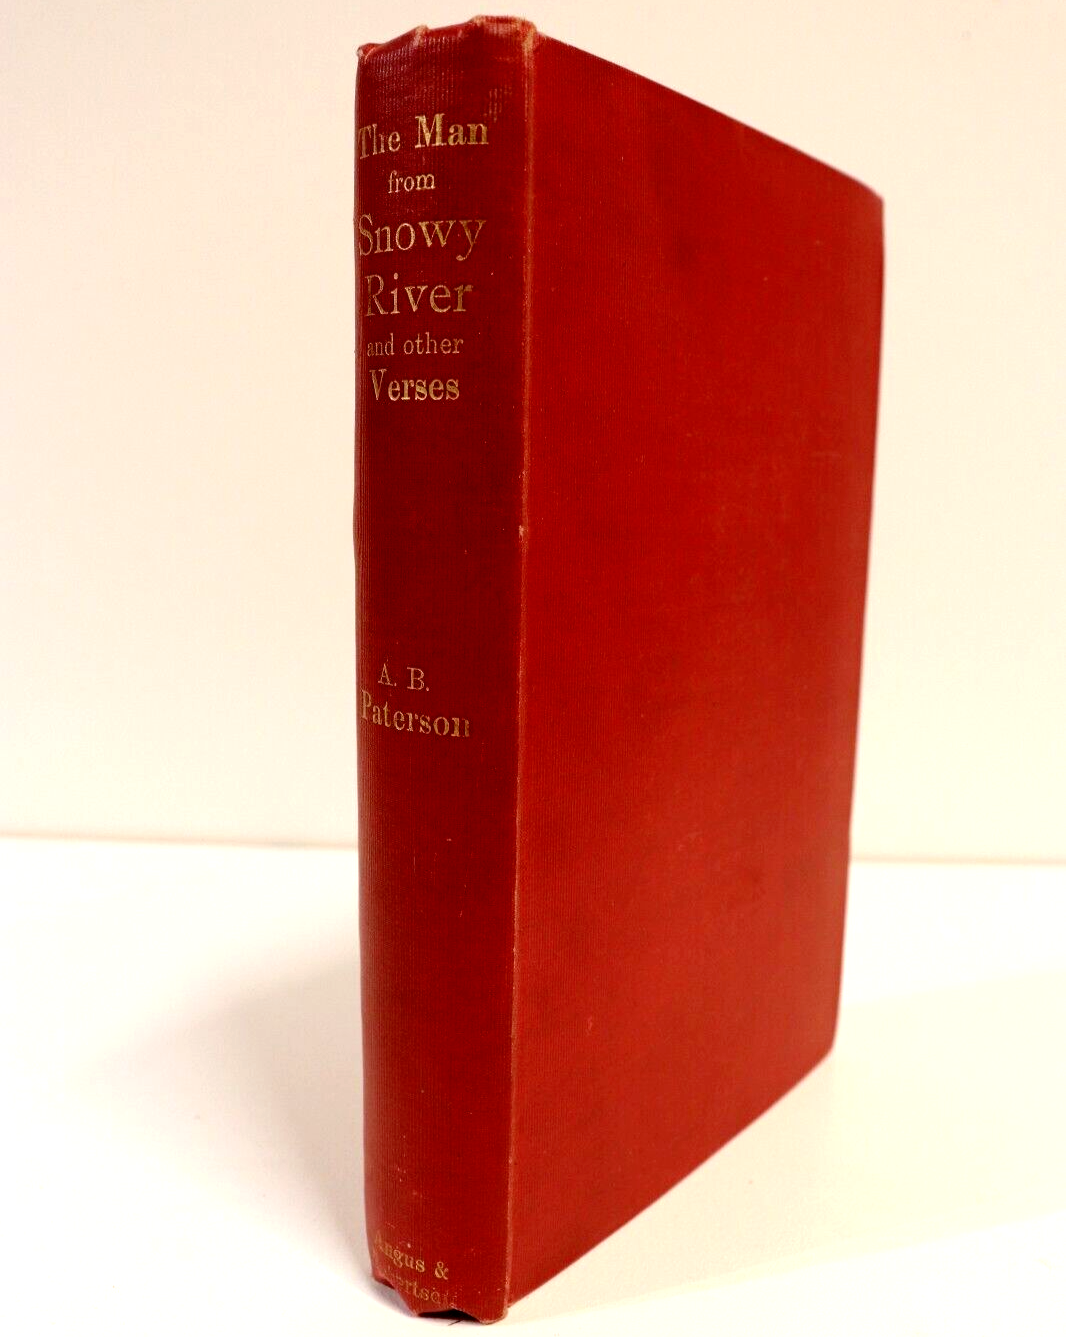 1897 The Man From Snowy River: A.B. Paterson Antique Australian Poetry Book